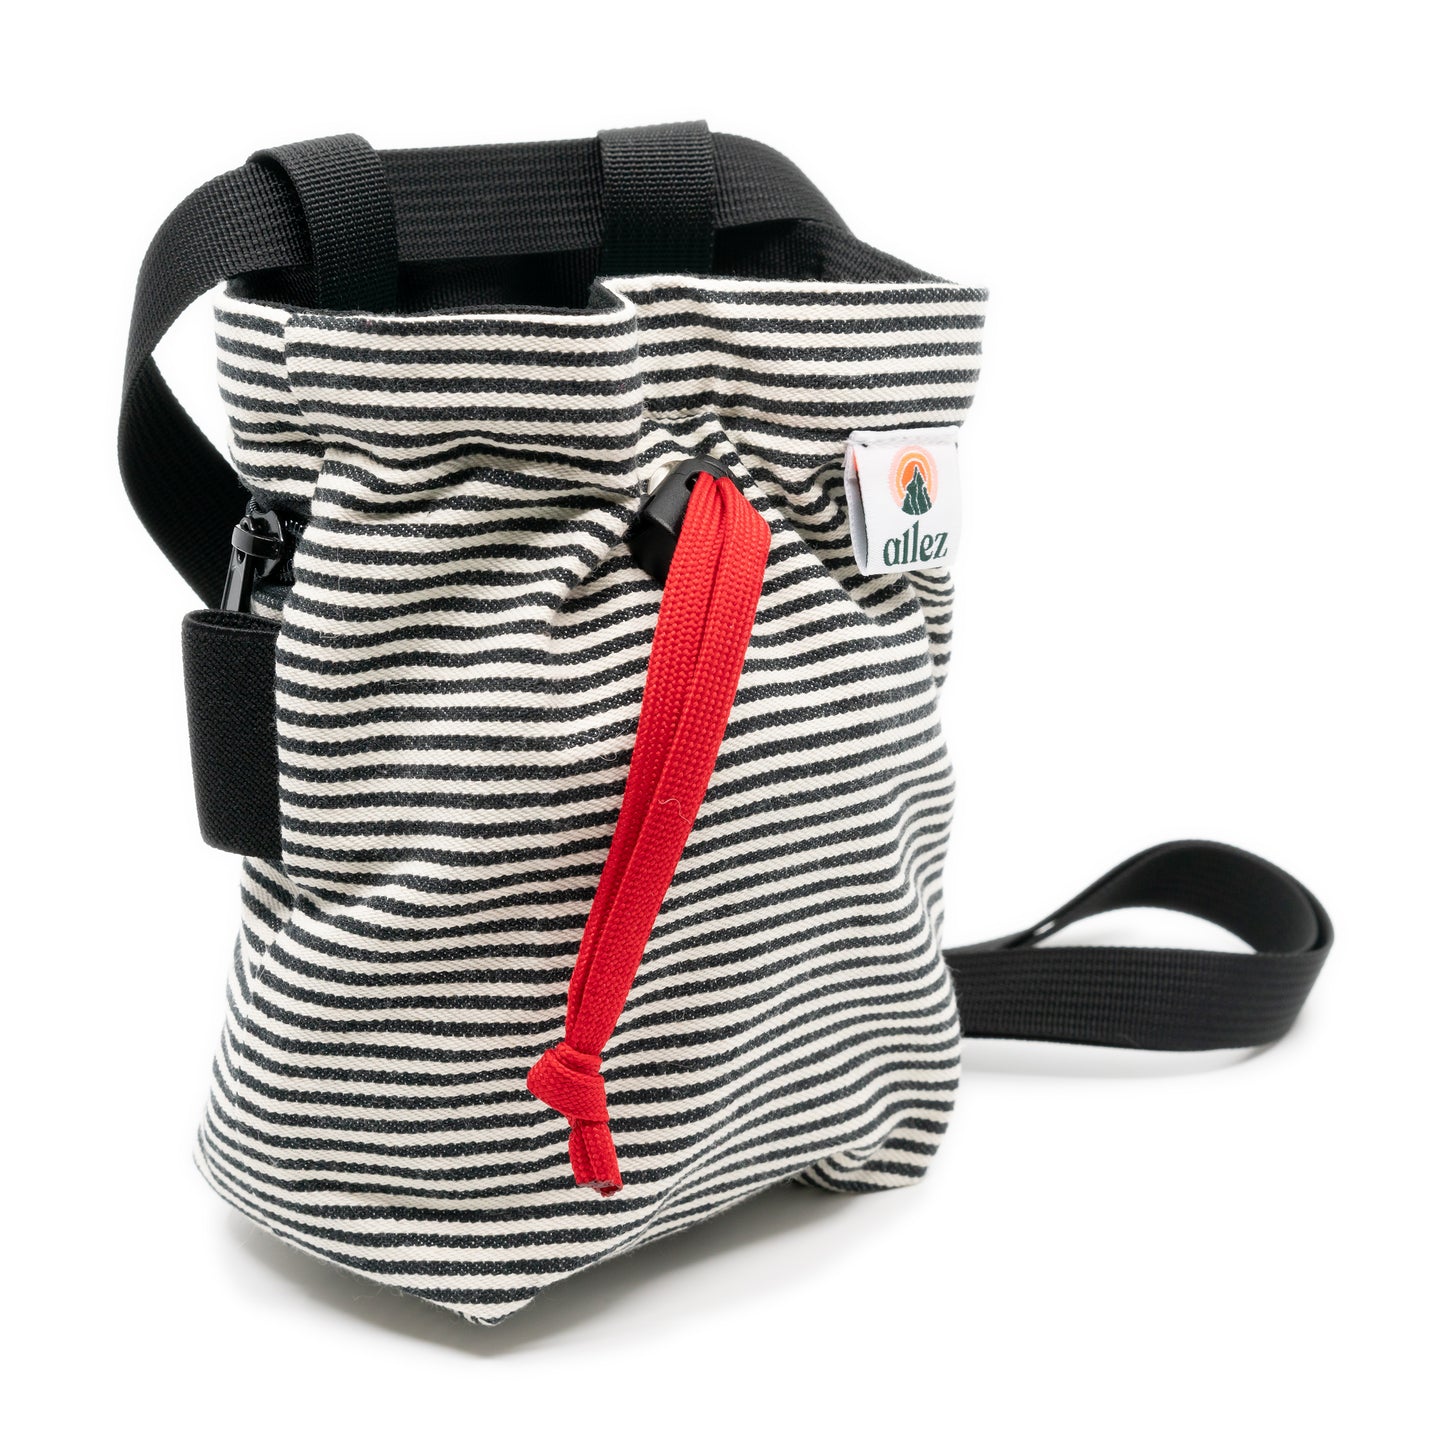 Allez Limited Edition Upcycled Chalk Bags